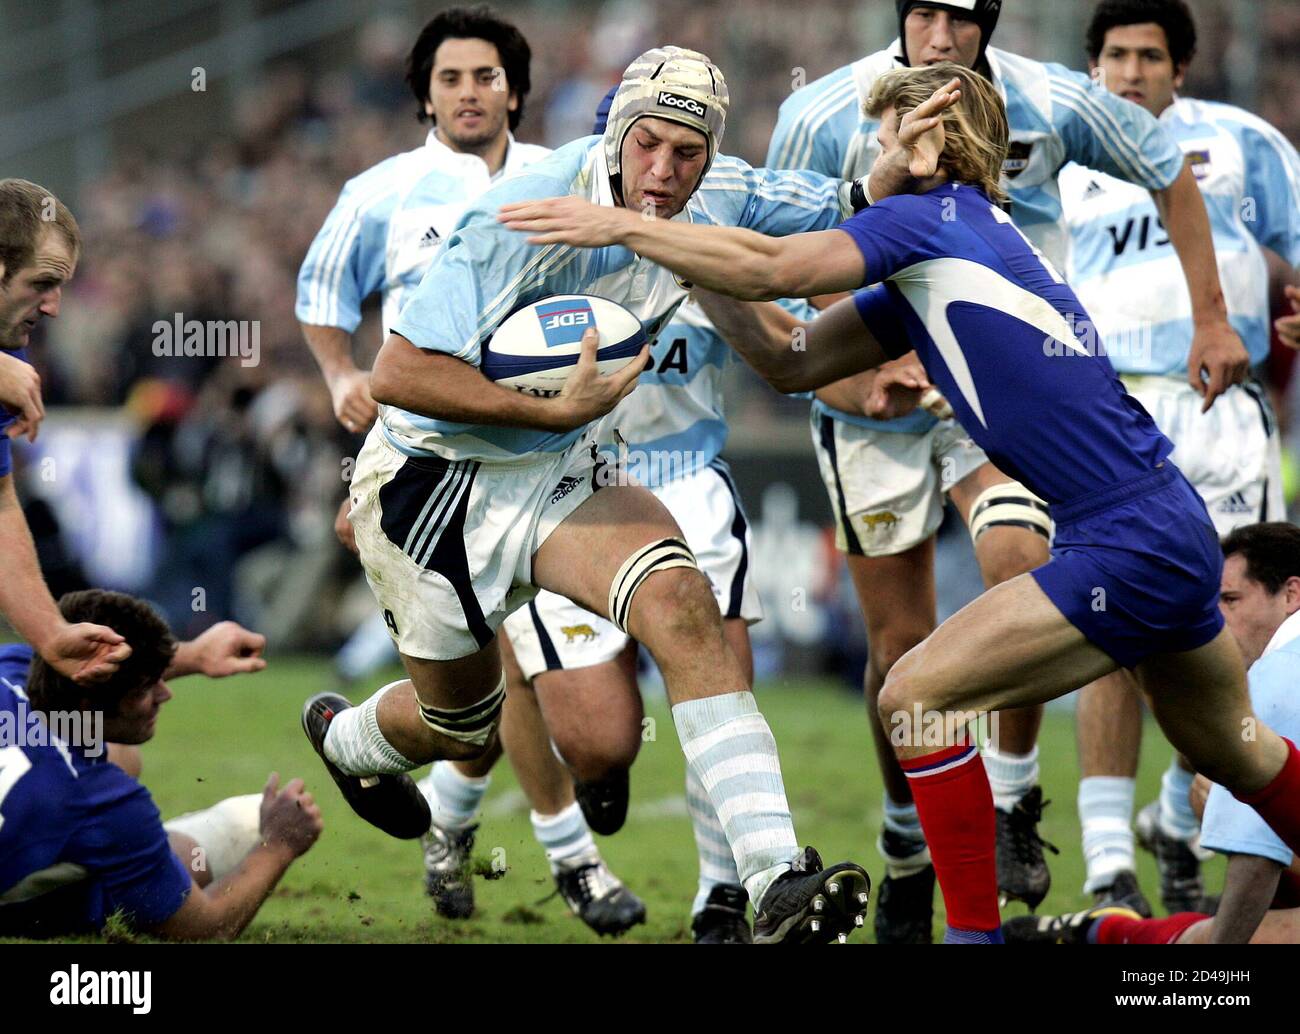 Argentina's Rimas Alvarez-Kairelis (C) is tackled by France's Aurelien  Rougerie during their rugby union test match at the Velodrome stadium in  Marseille, November 20, 2004. Argentina defeated France 24-14 Photo Stock -  Alamy